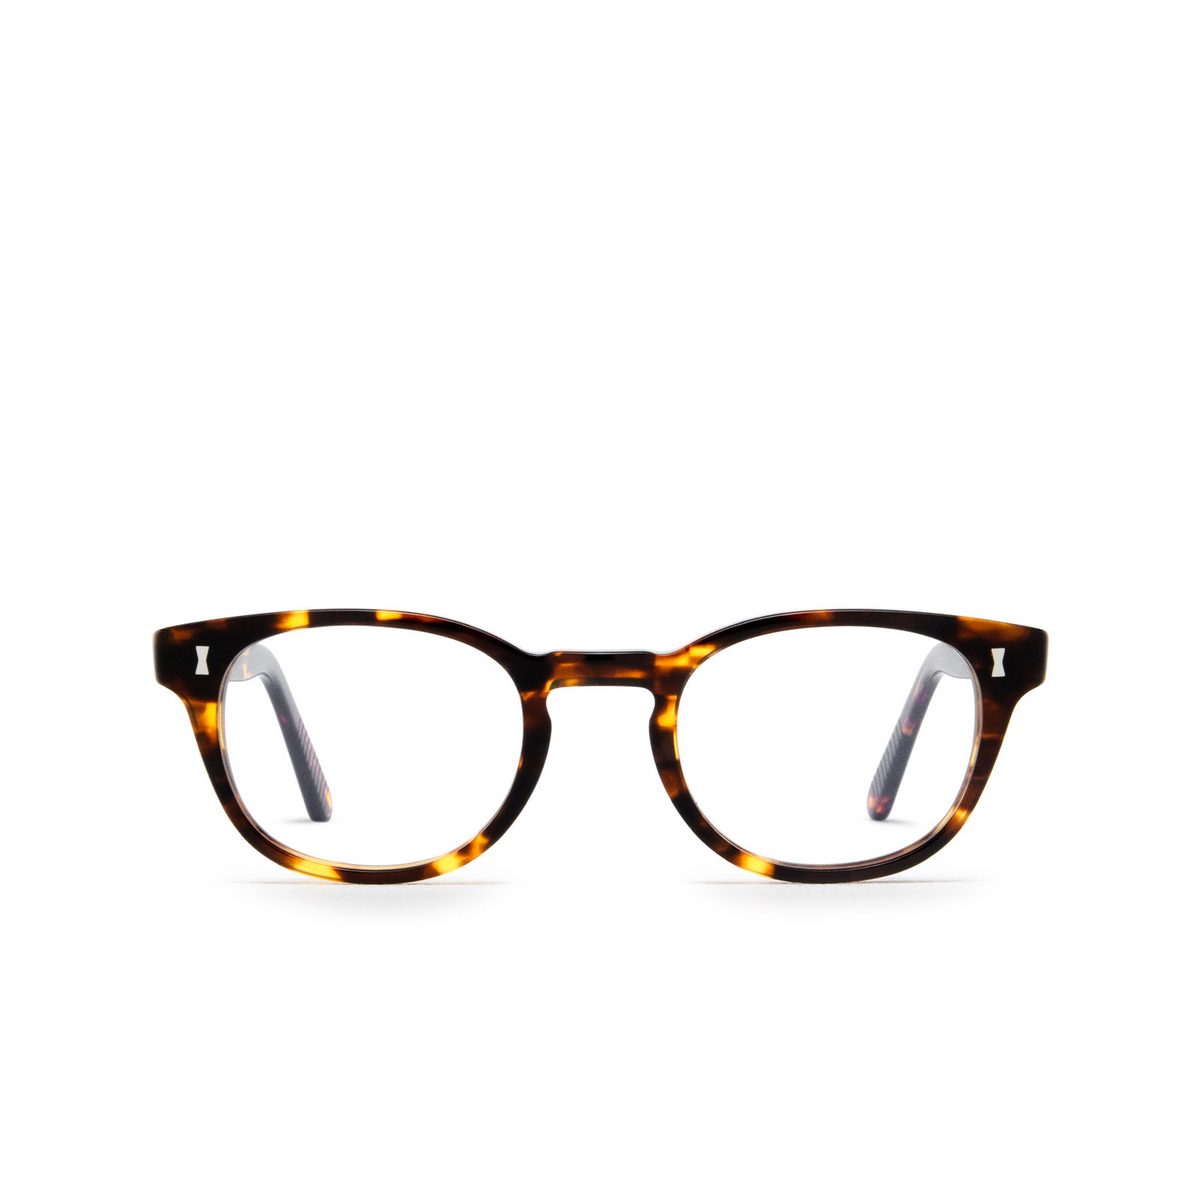 Cubitts WICKLOW Eyeglasses WIC-R-LIG Light Turtle - front view